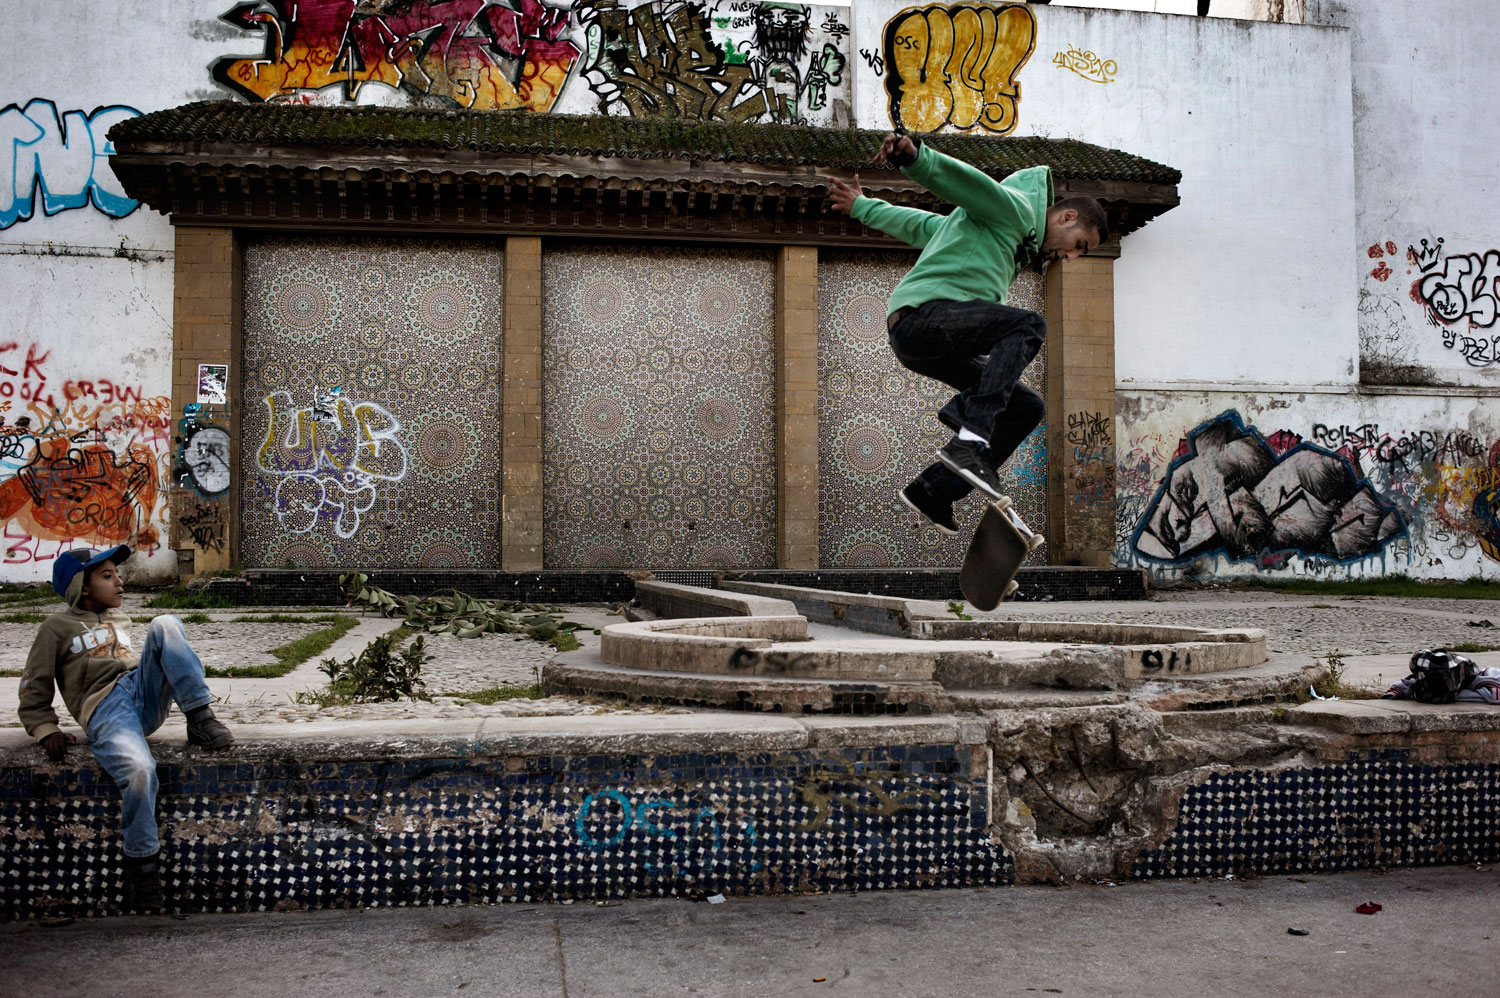 March 2012. Rachid Ait Yahi, a 28-year-old Casablanca resident, is unemployed and whiles away his time skateboarding with his friends at the Park de la Ligue Arabe in the city center in Casablanca.